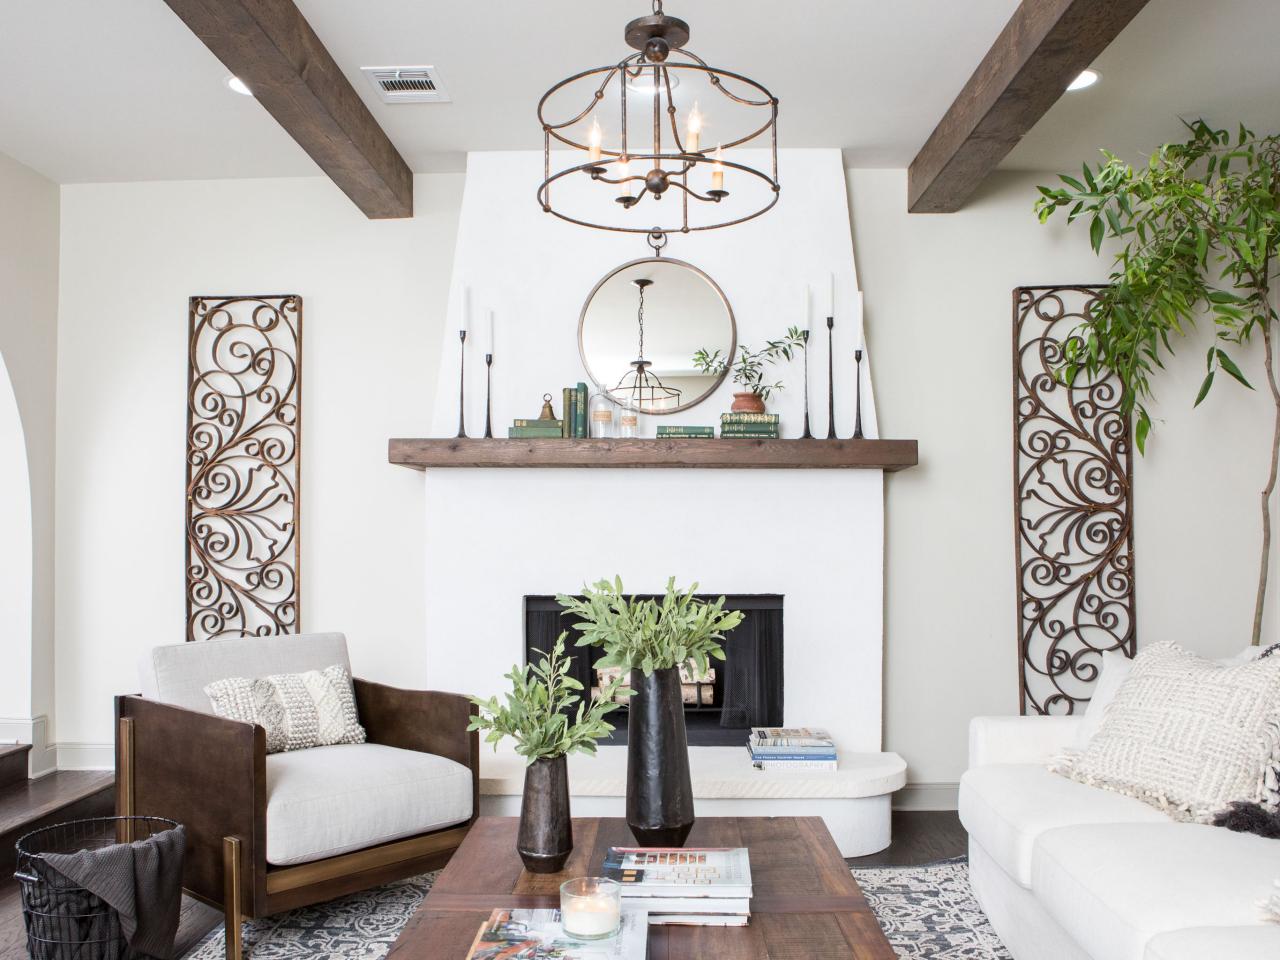 Ranch-style living room design by Joanna Gaines.